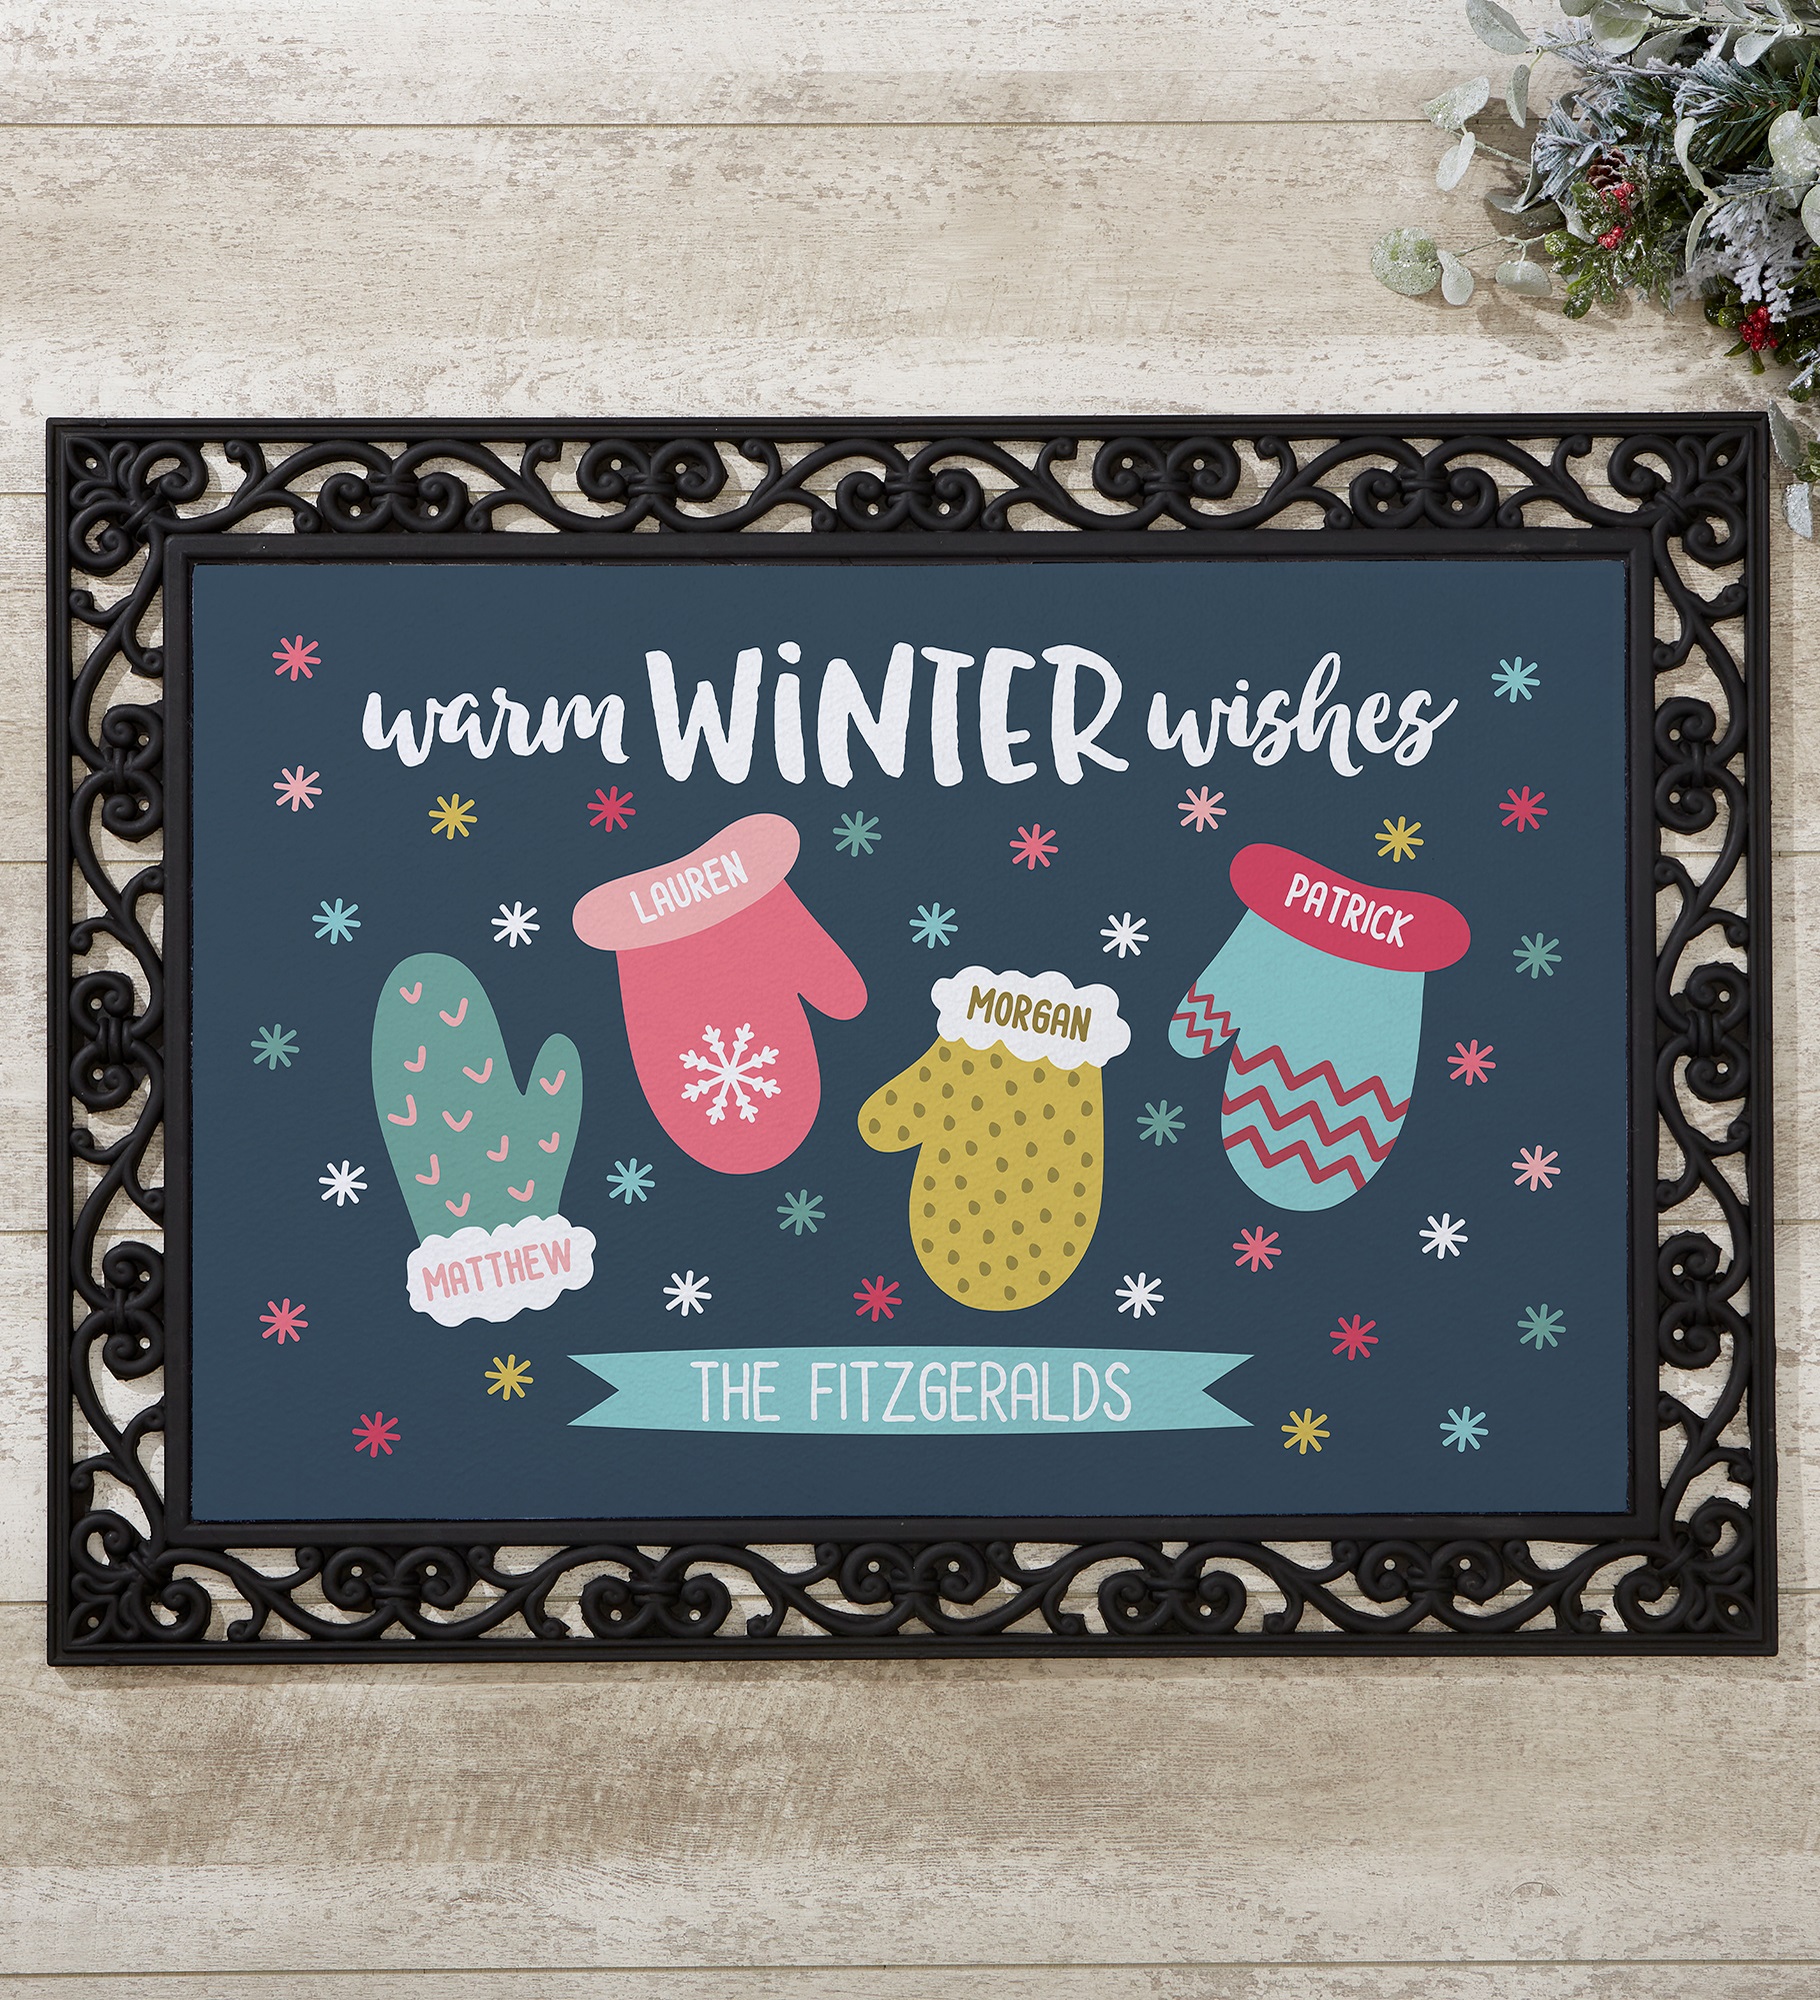 Warm Winter Wishes Personalized Doormats